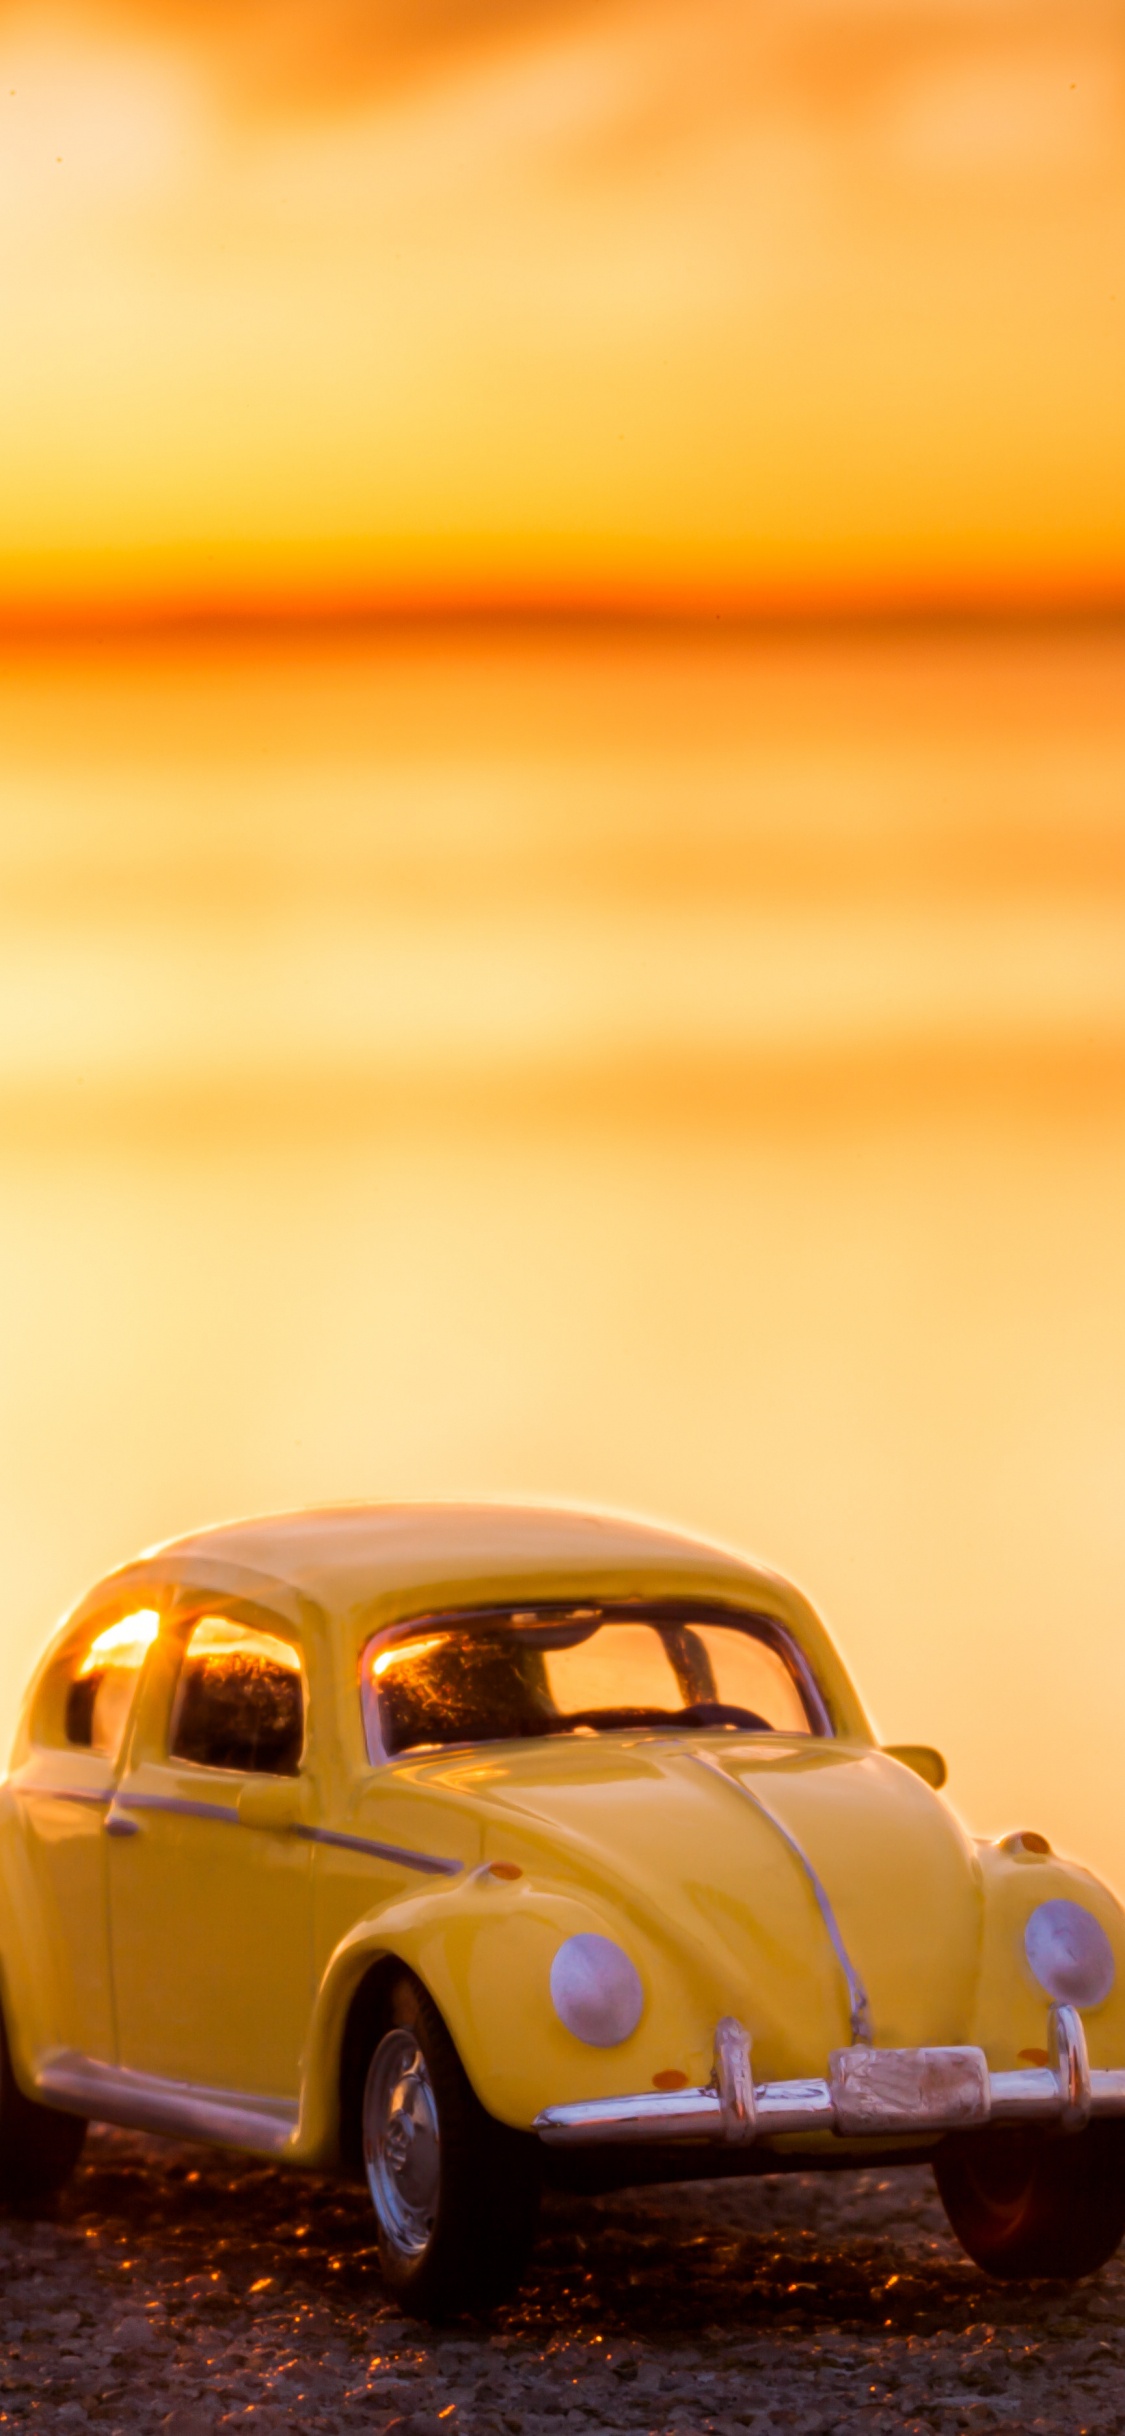 Yellow Volkswagen Beetle on Shore During Sunset. Wallpaper in 1125x2436 Resolution